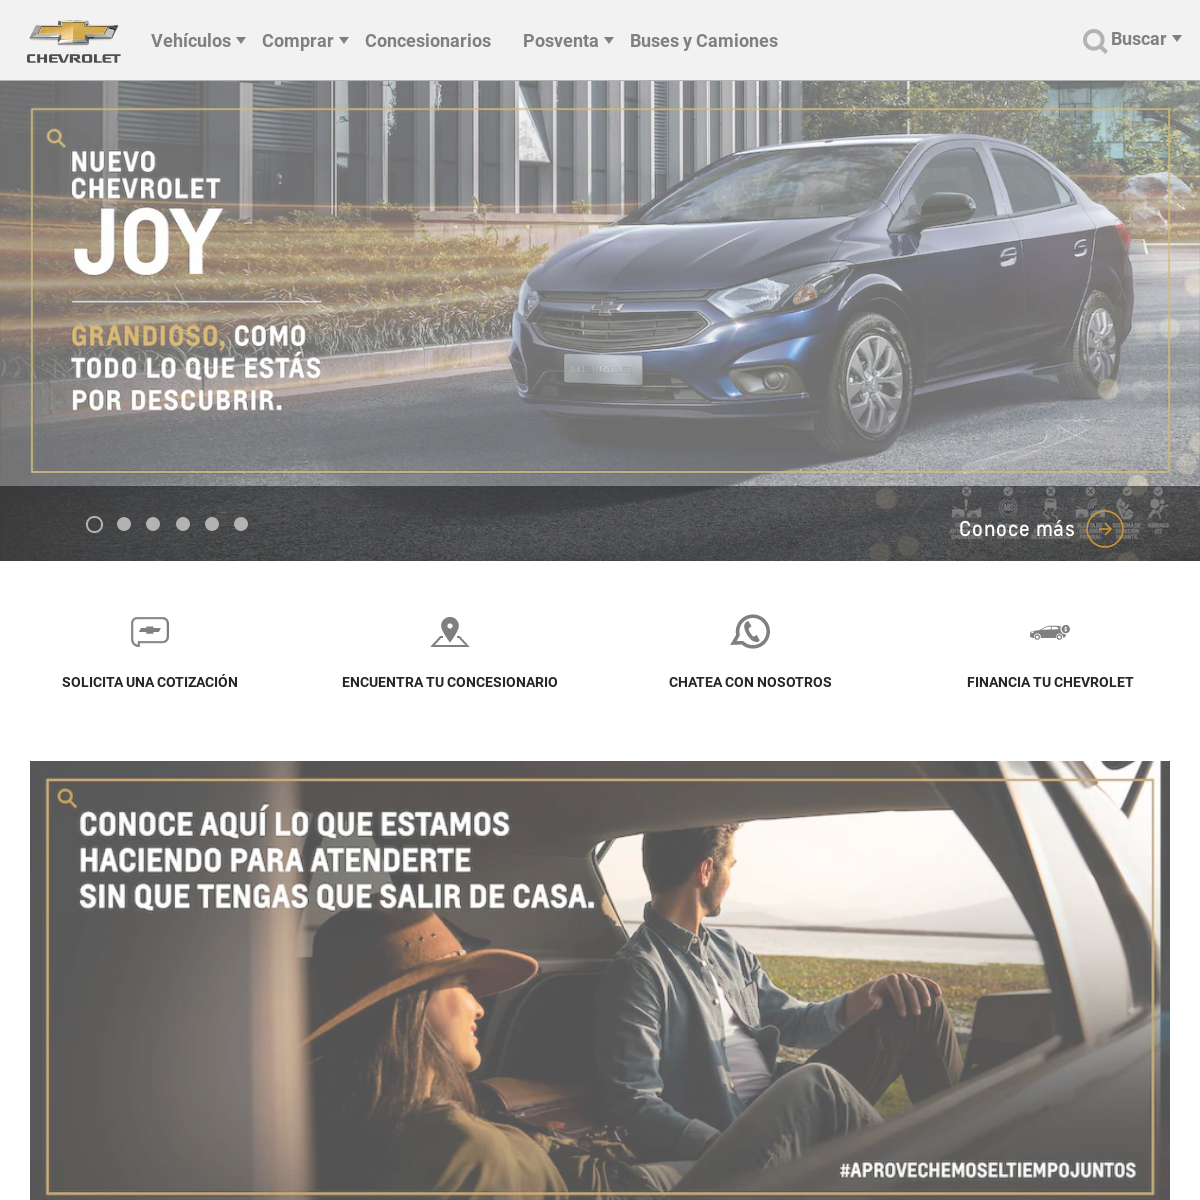 A complete backup of chevrolet.com.co